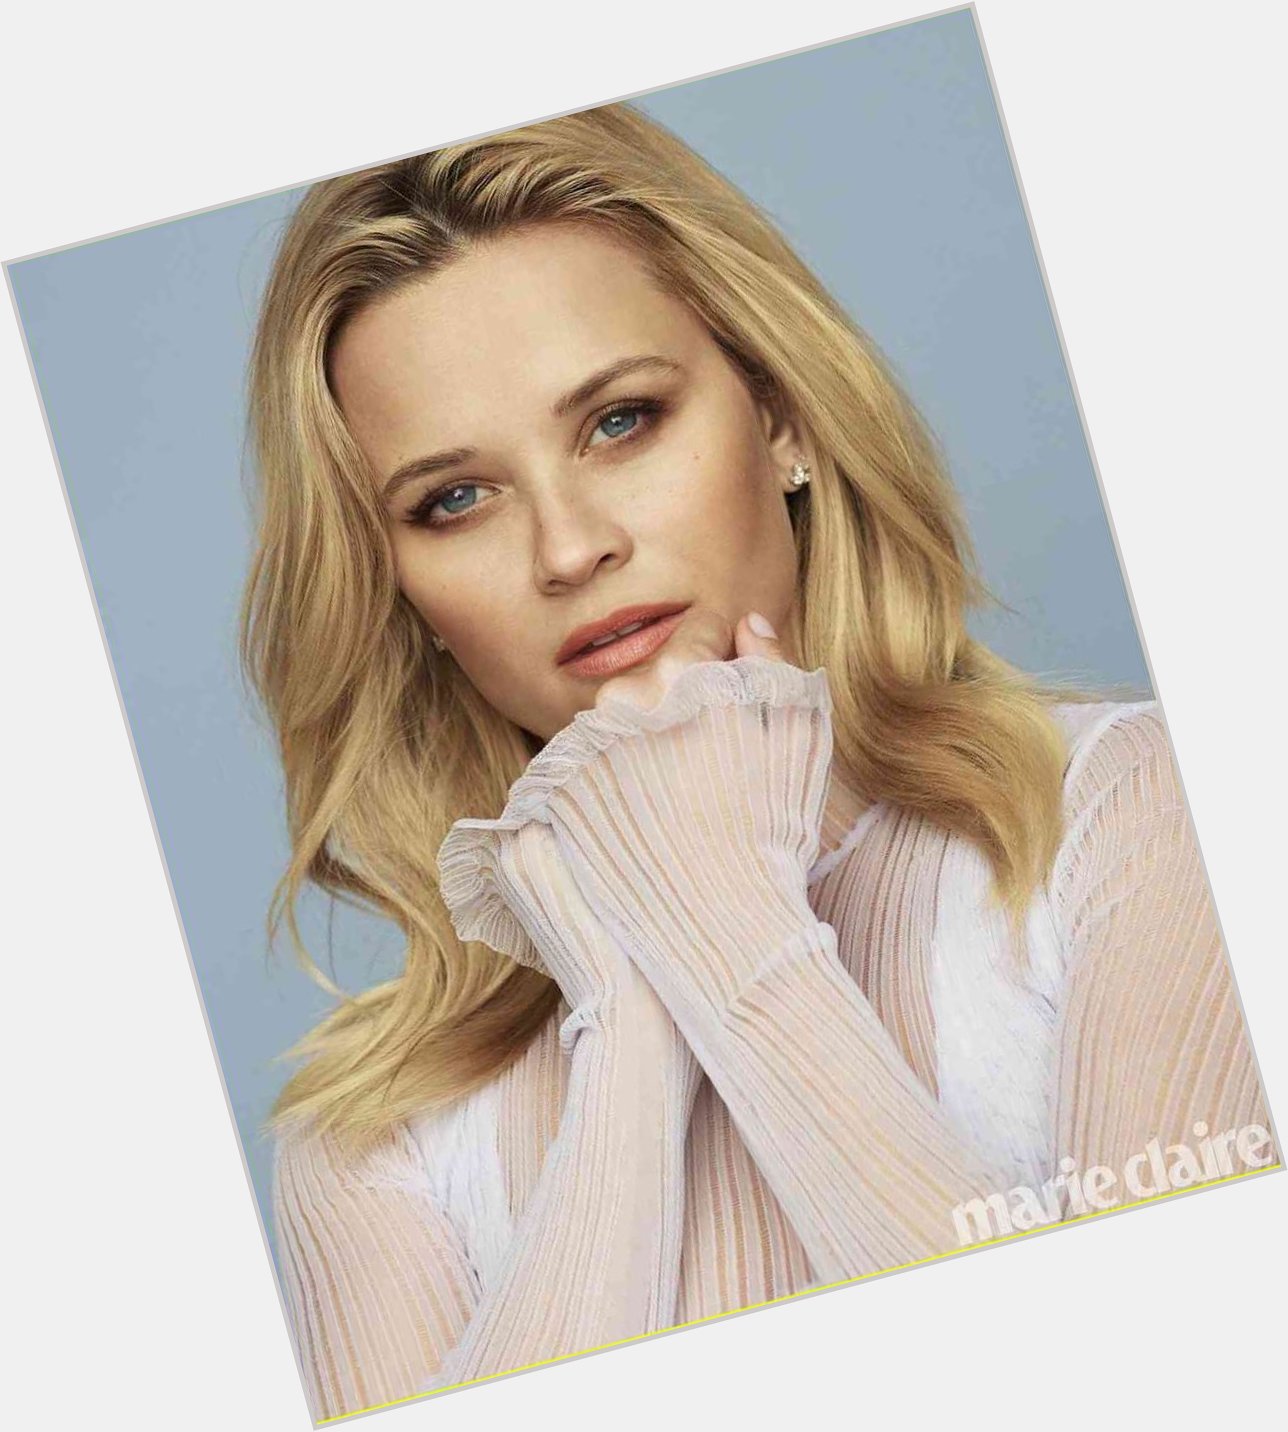 Happy birthday to one of the women I admire most, Reese Witherspoon!  